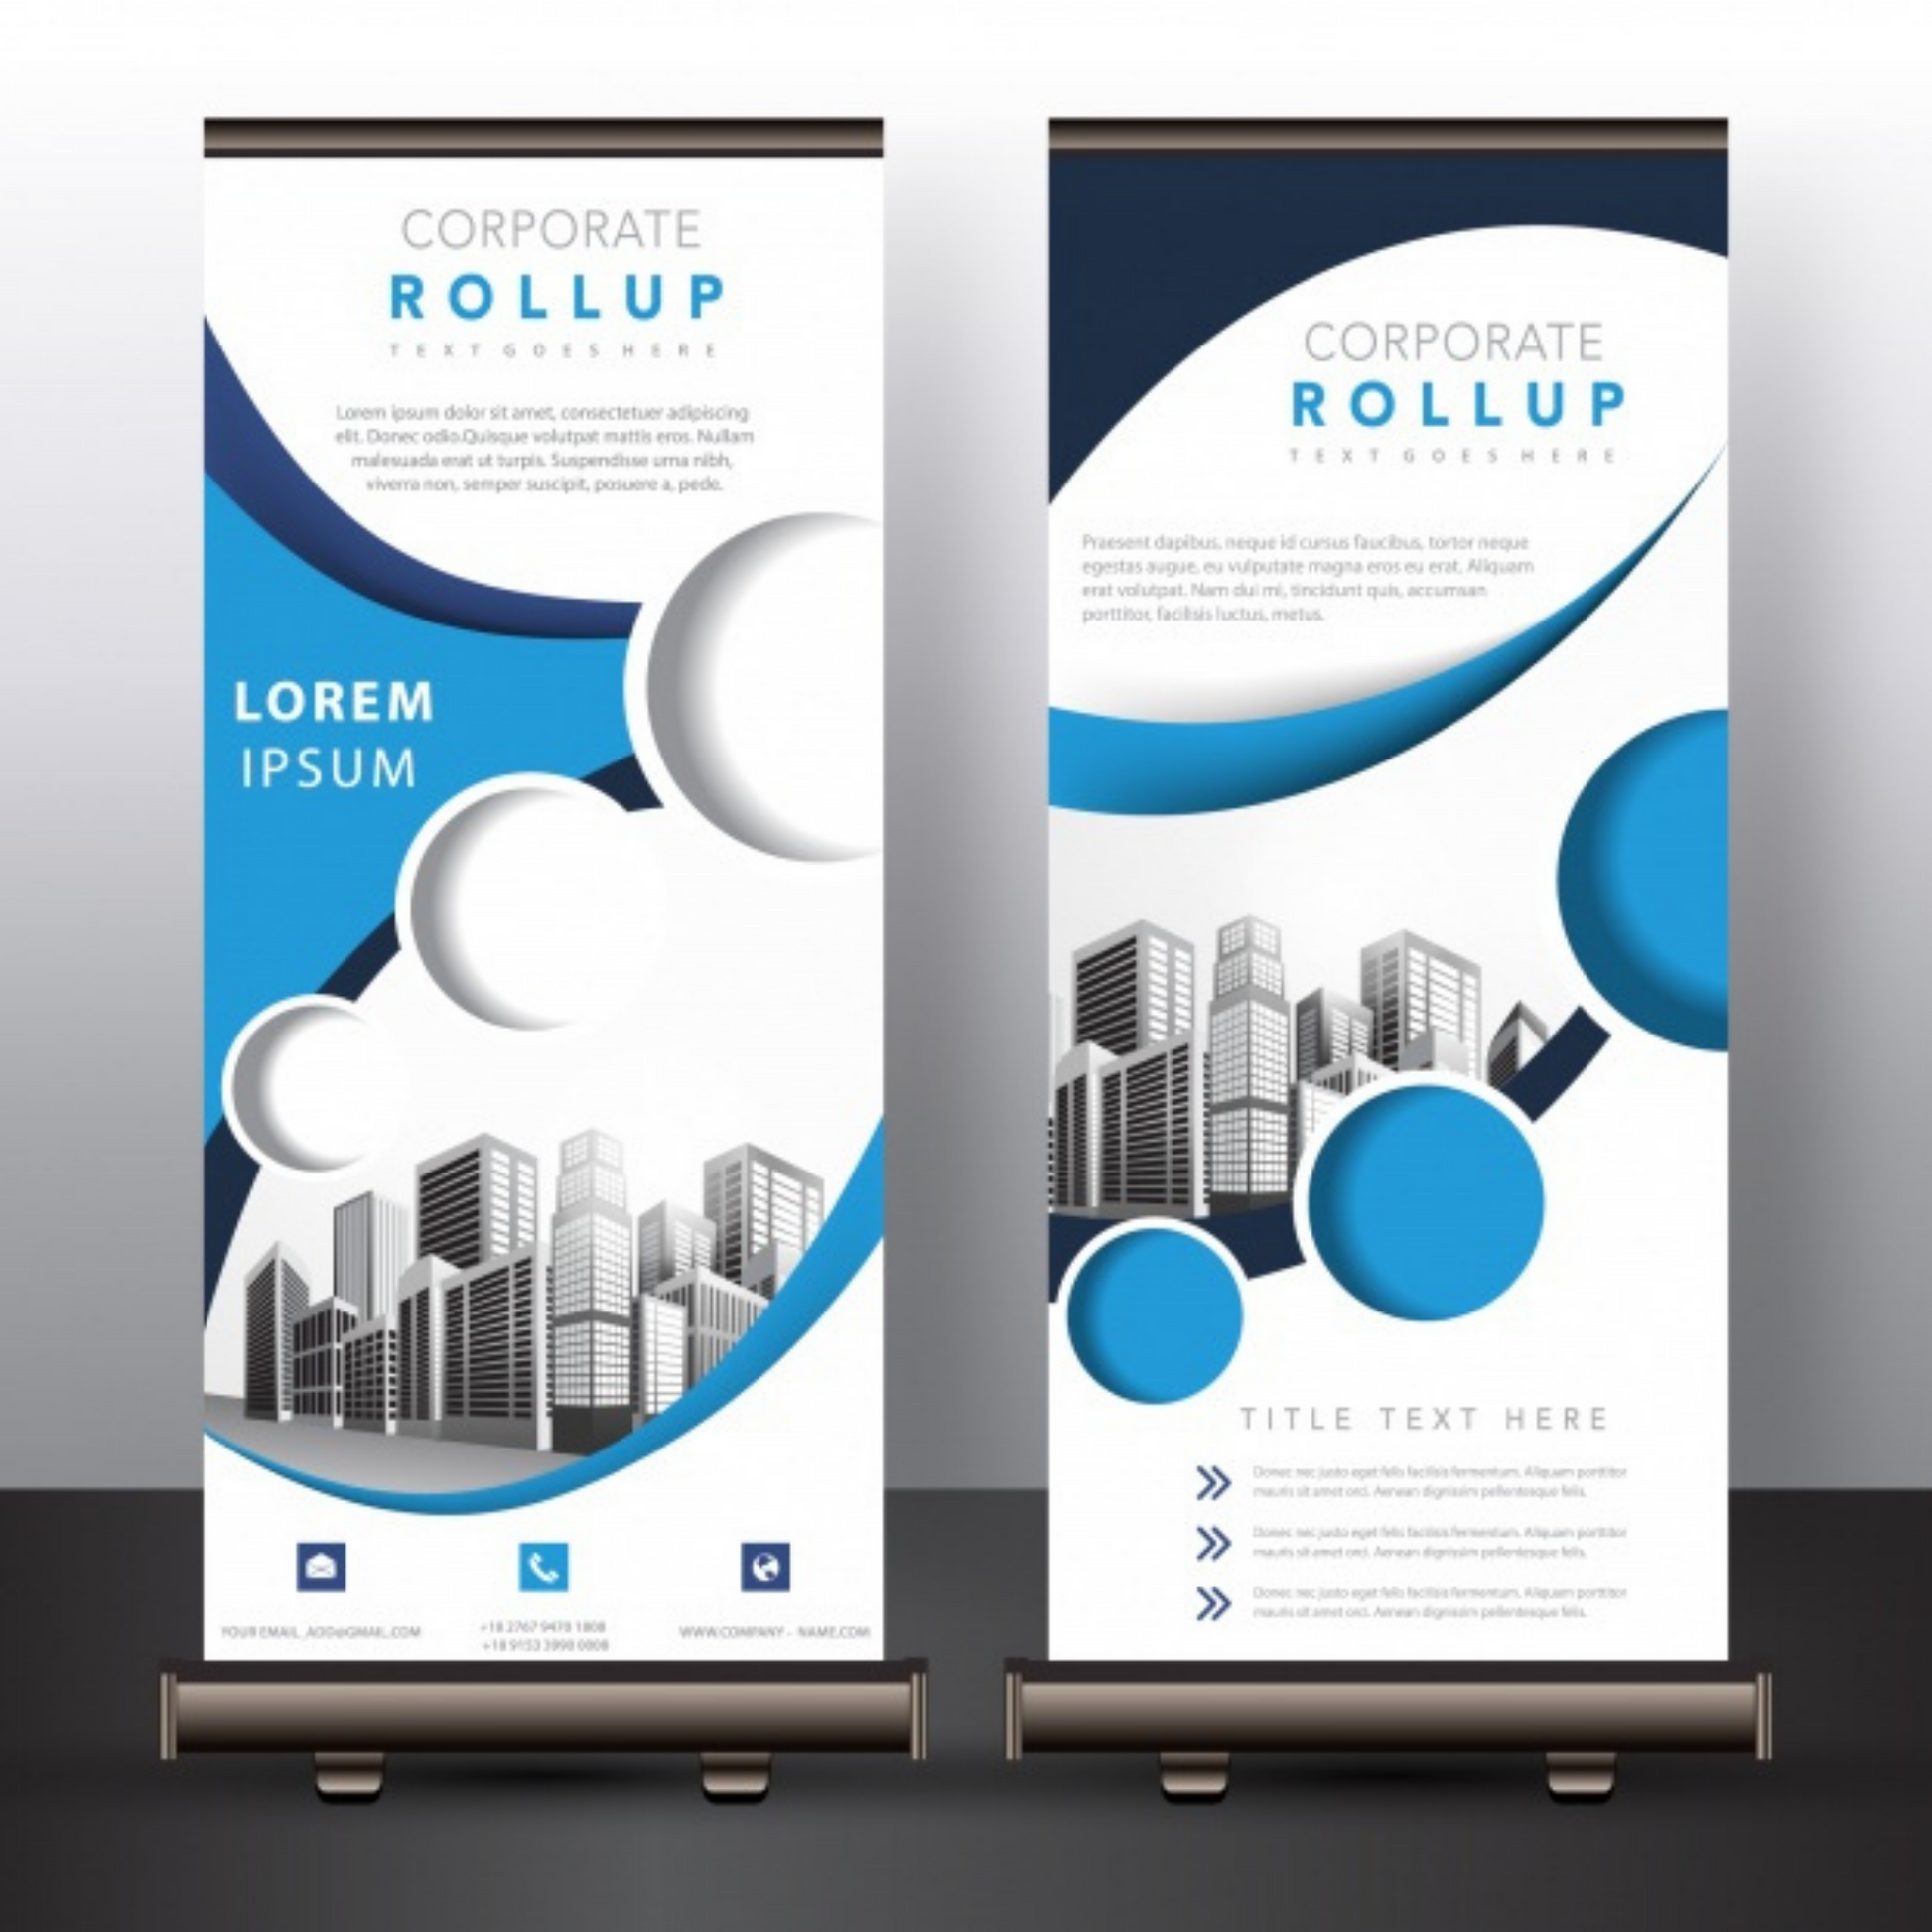 Roll Up – Lito Express